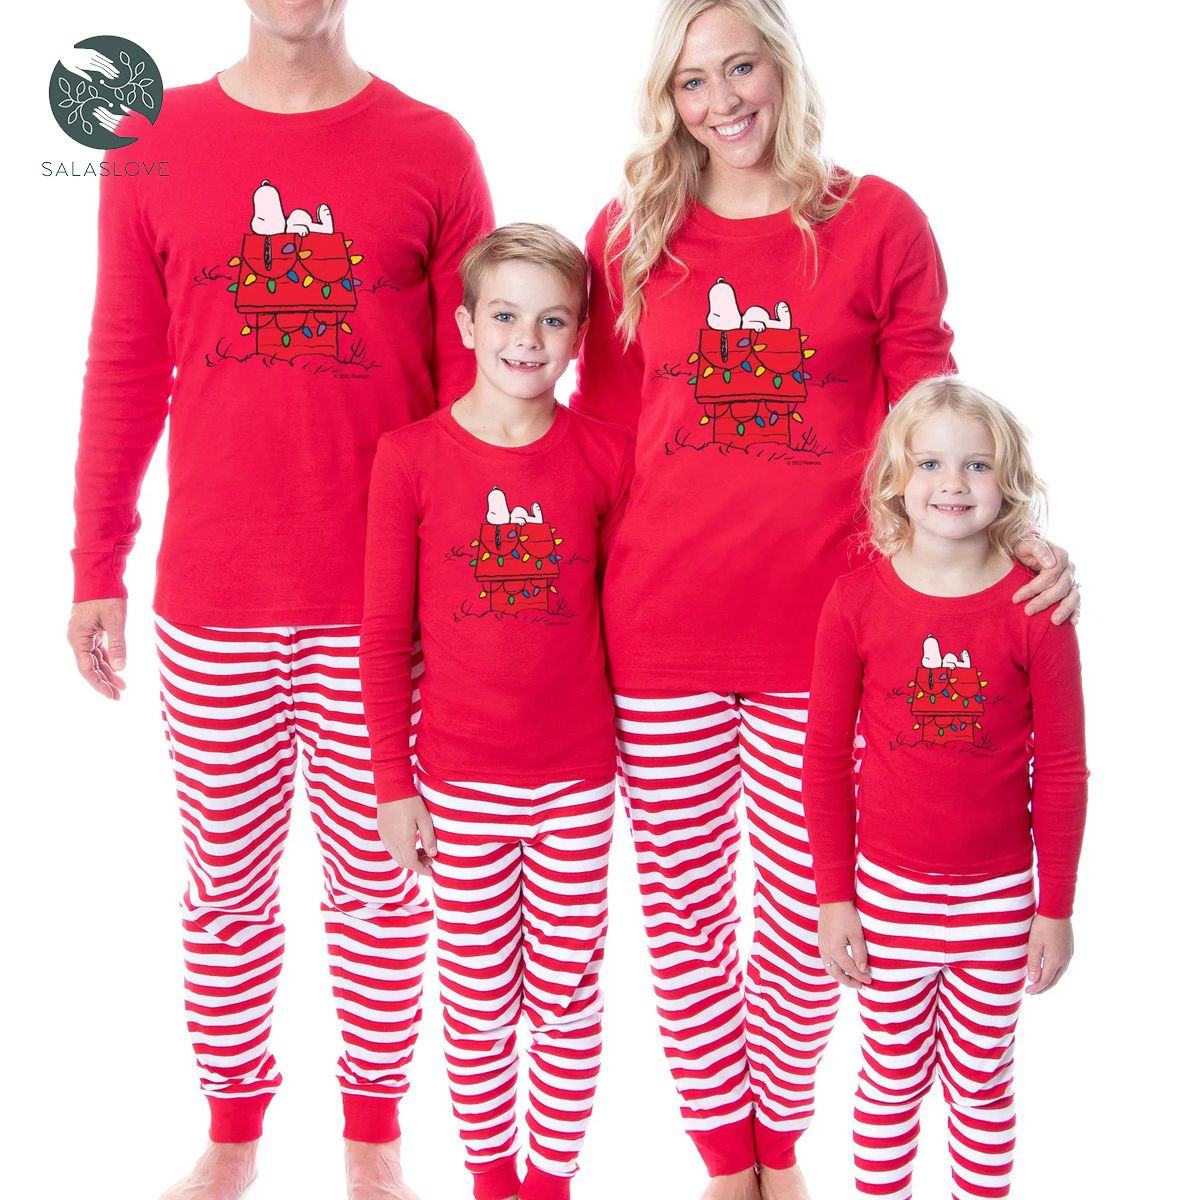 Peanuts Doghouse Christmas Tight Fit Cotton Matching Family Pajama Set